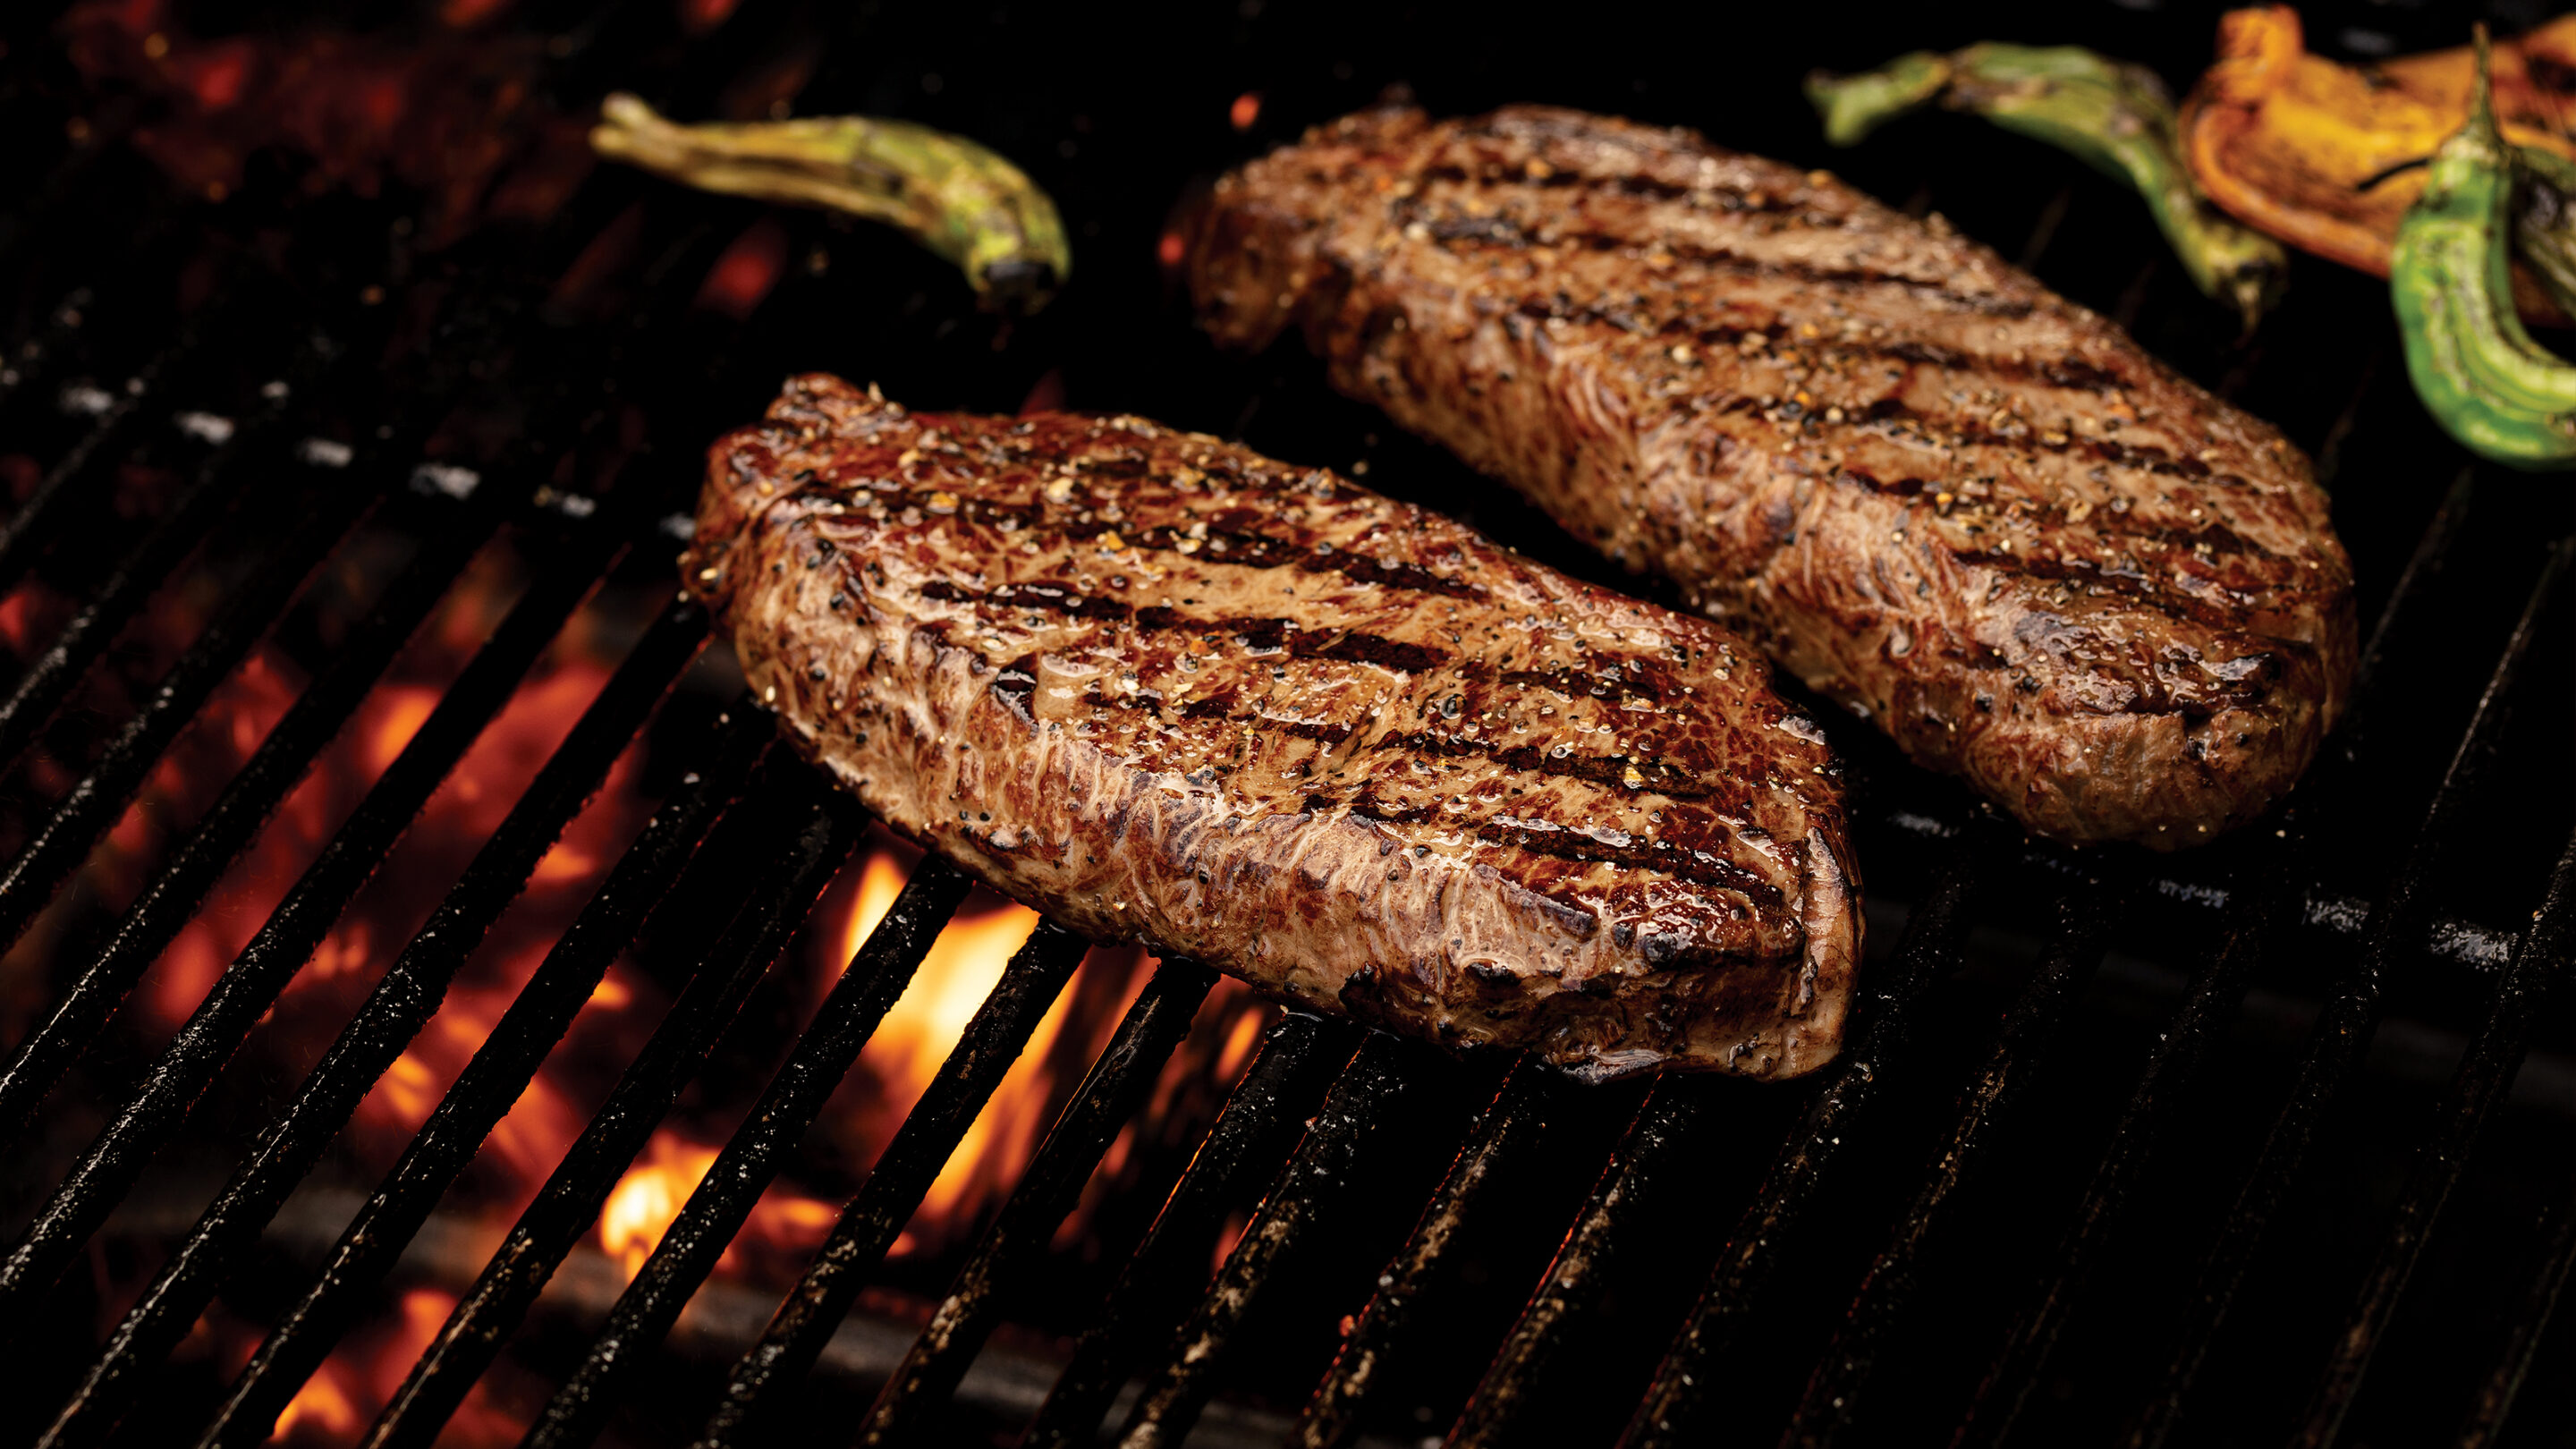 https://blog-content.omahasteaks.com/wp-content/uploads/2022/06/blogwp_how-to-grill-a-steak-8-tips-for-success-scaled-1.jpg